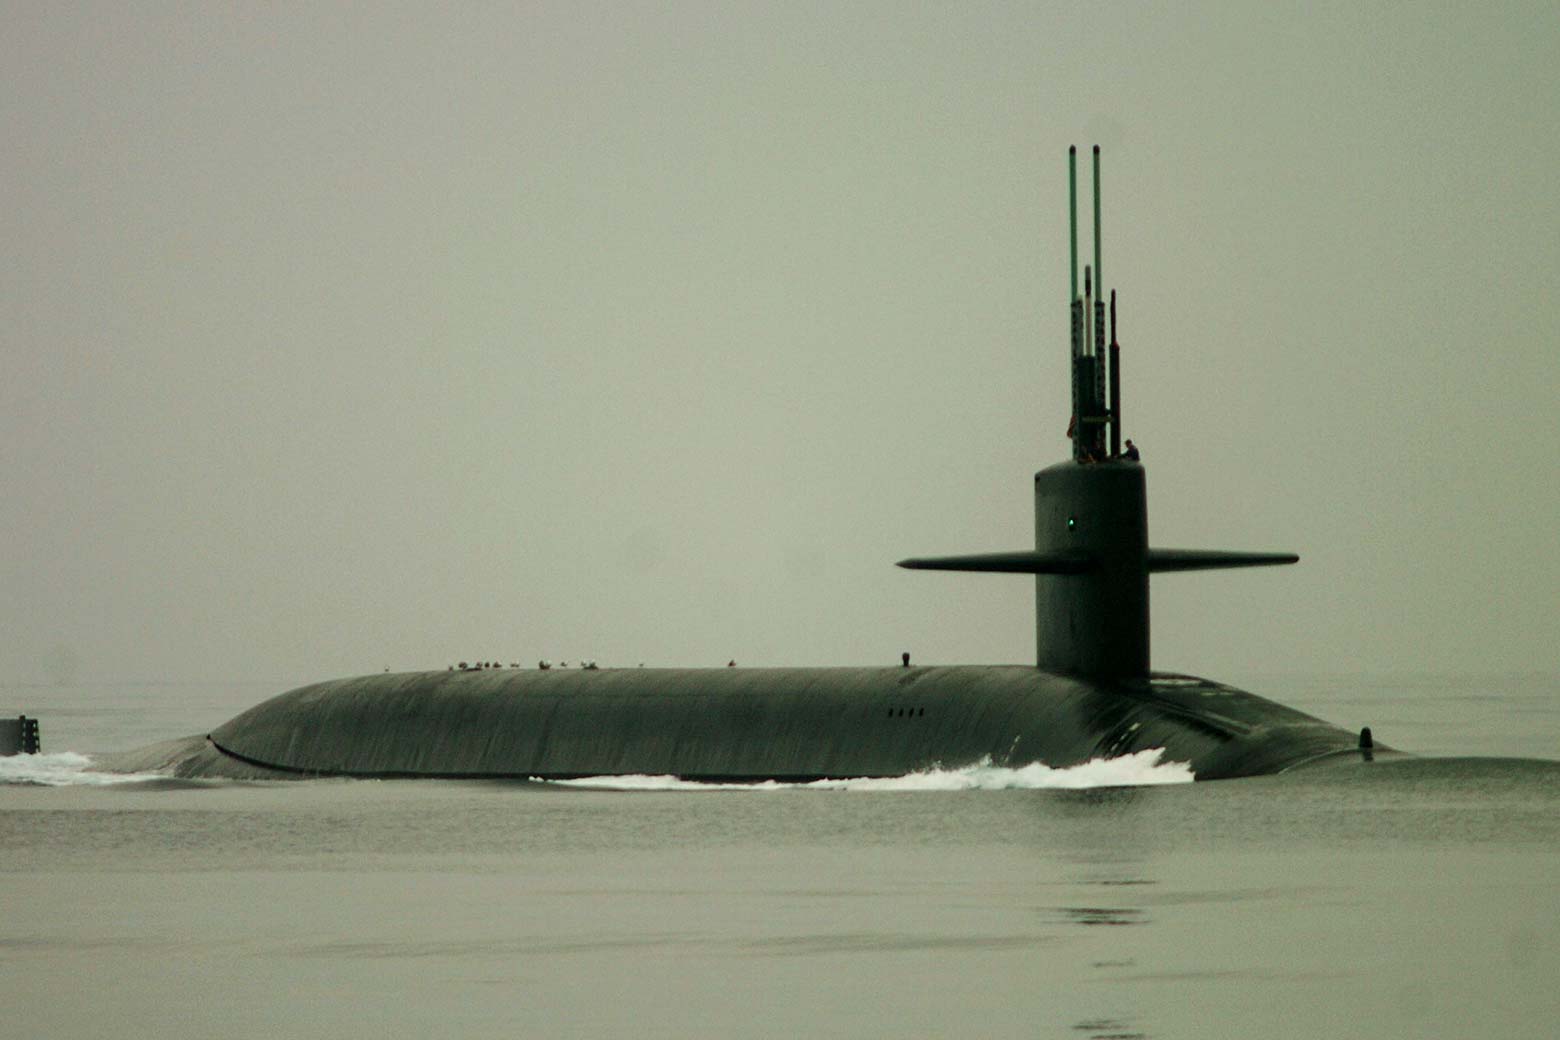 A submarine mostly submerged in water.